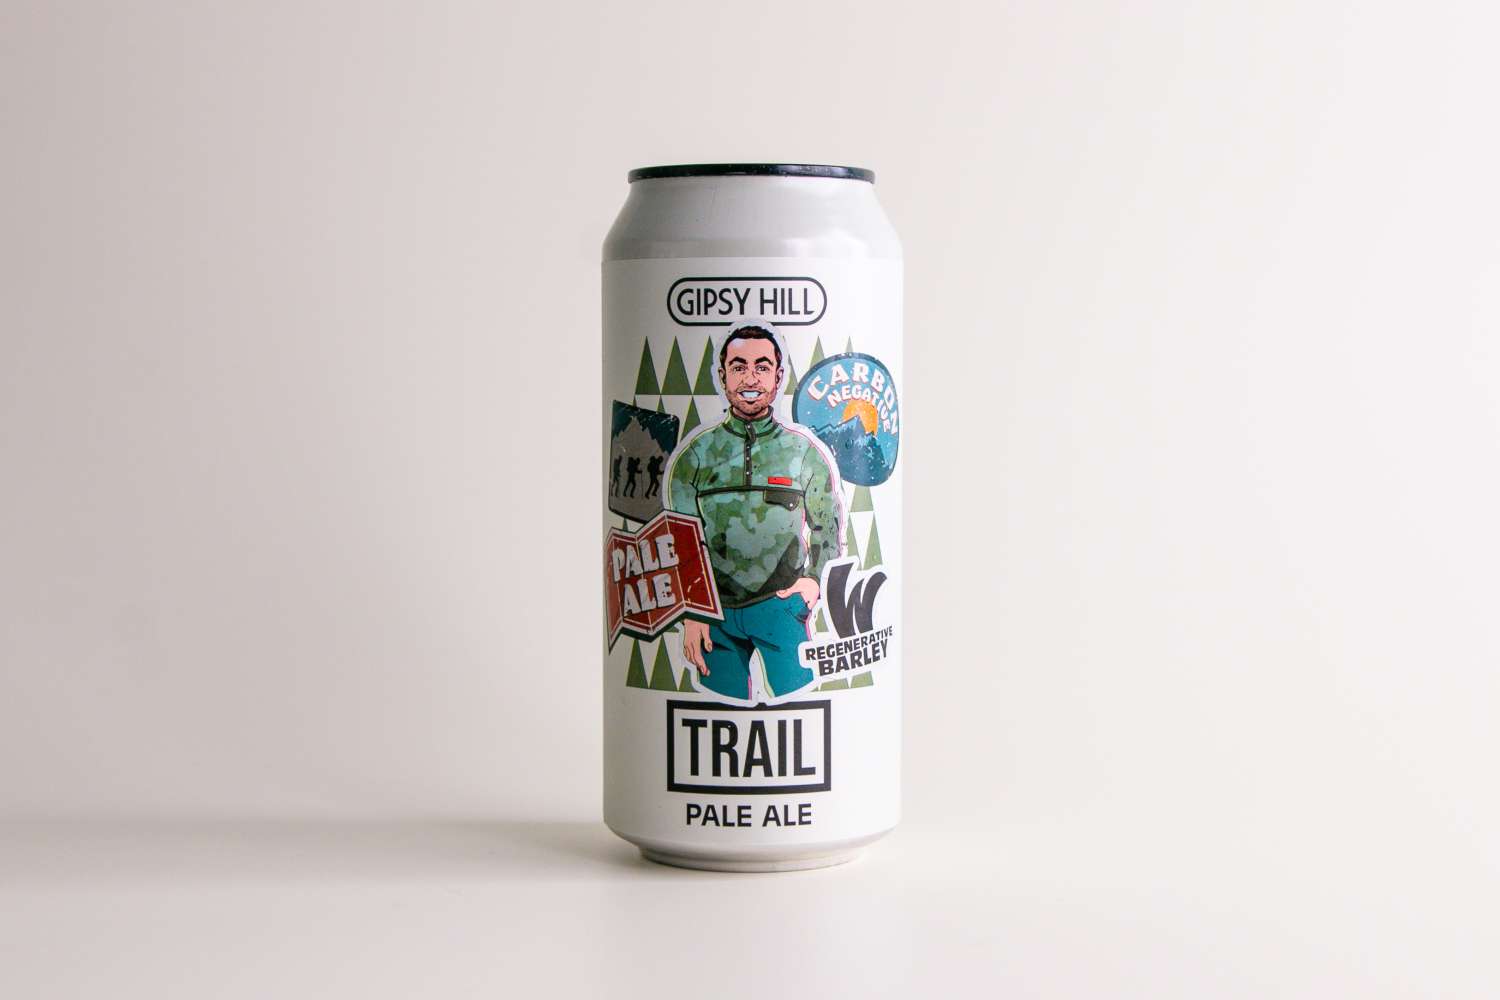 Trail launches at Waitrose! image